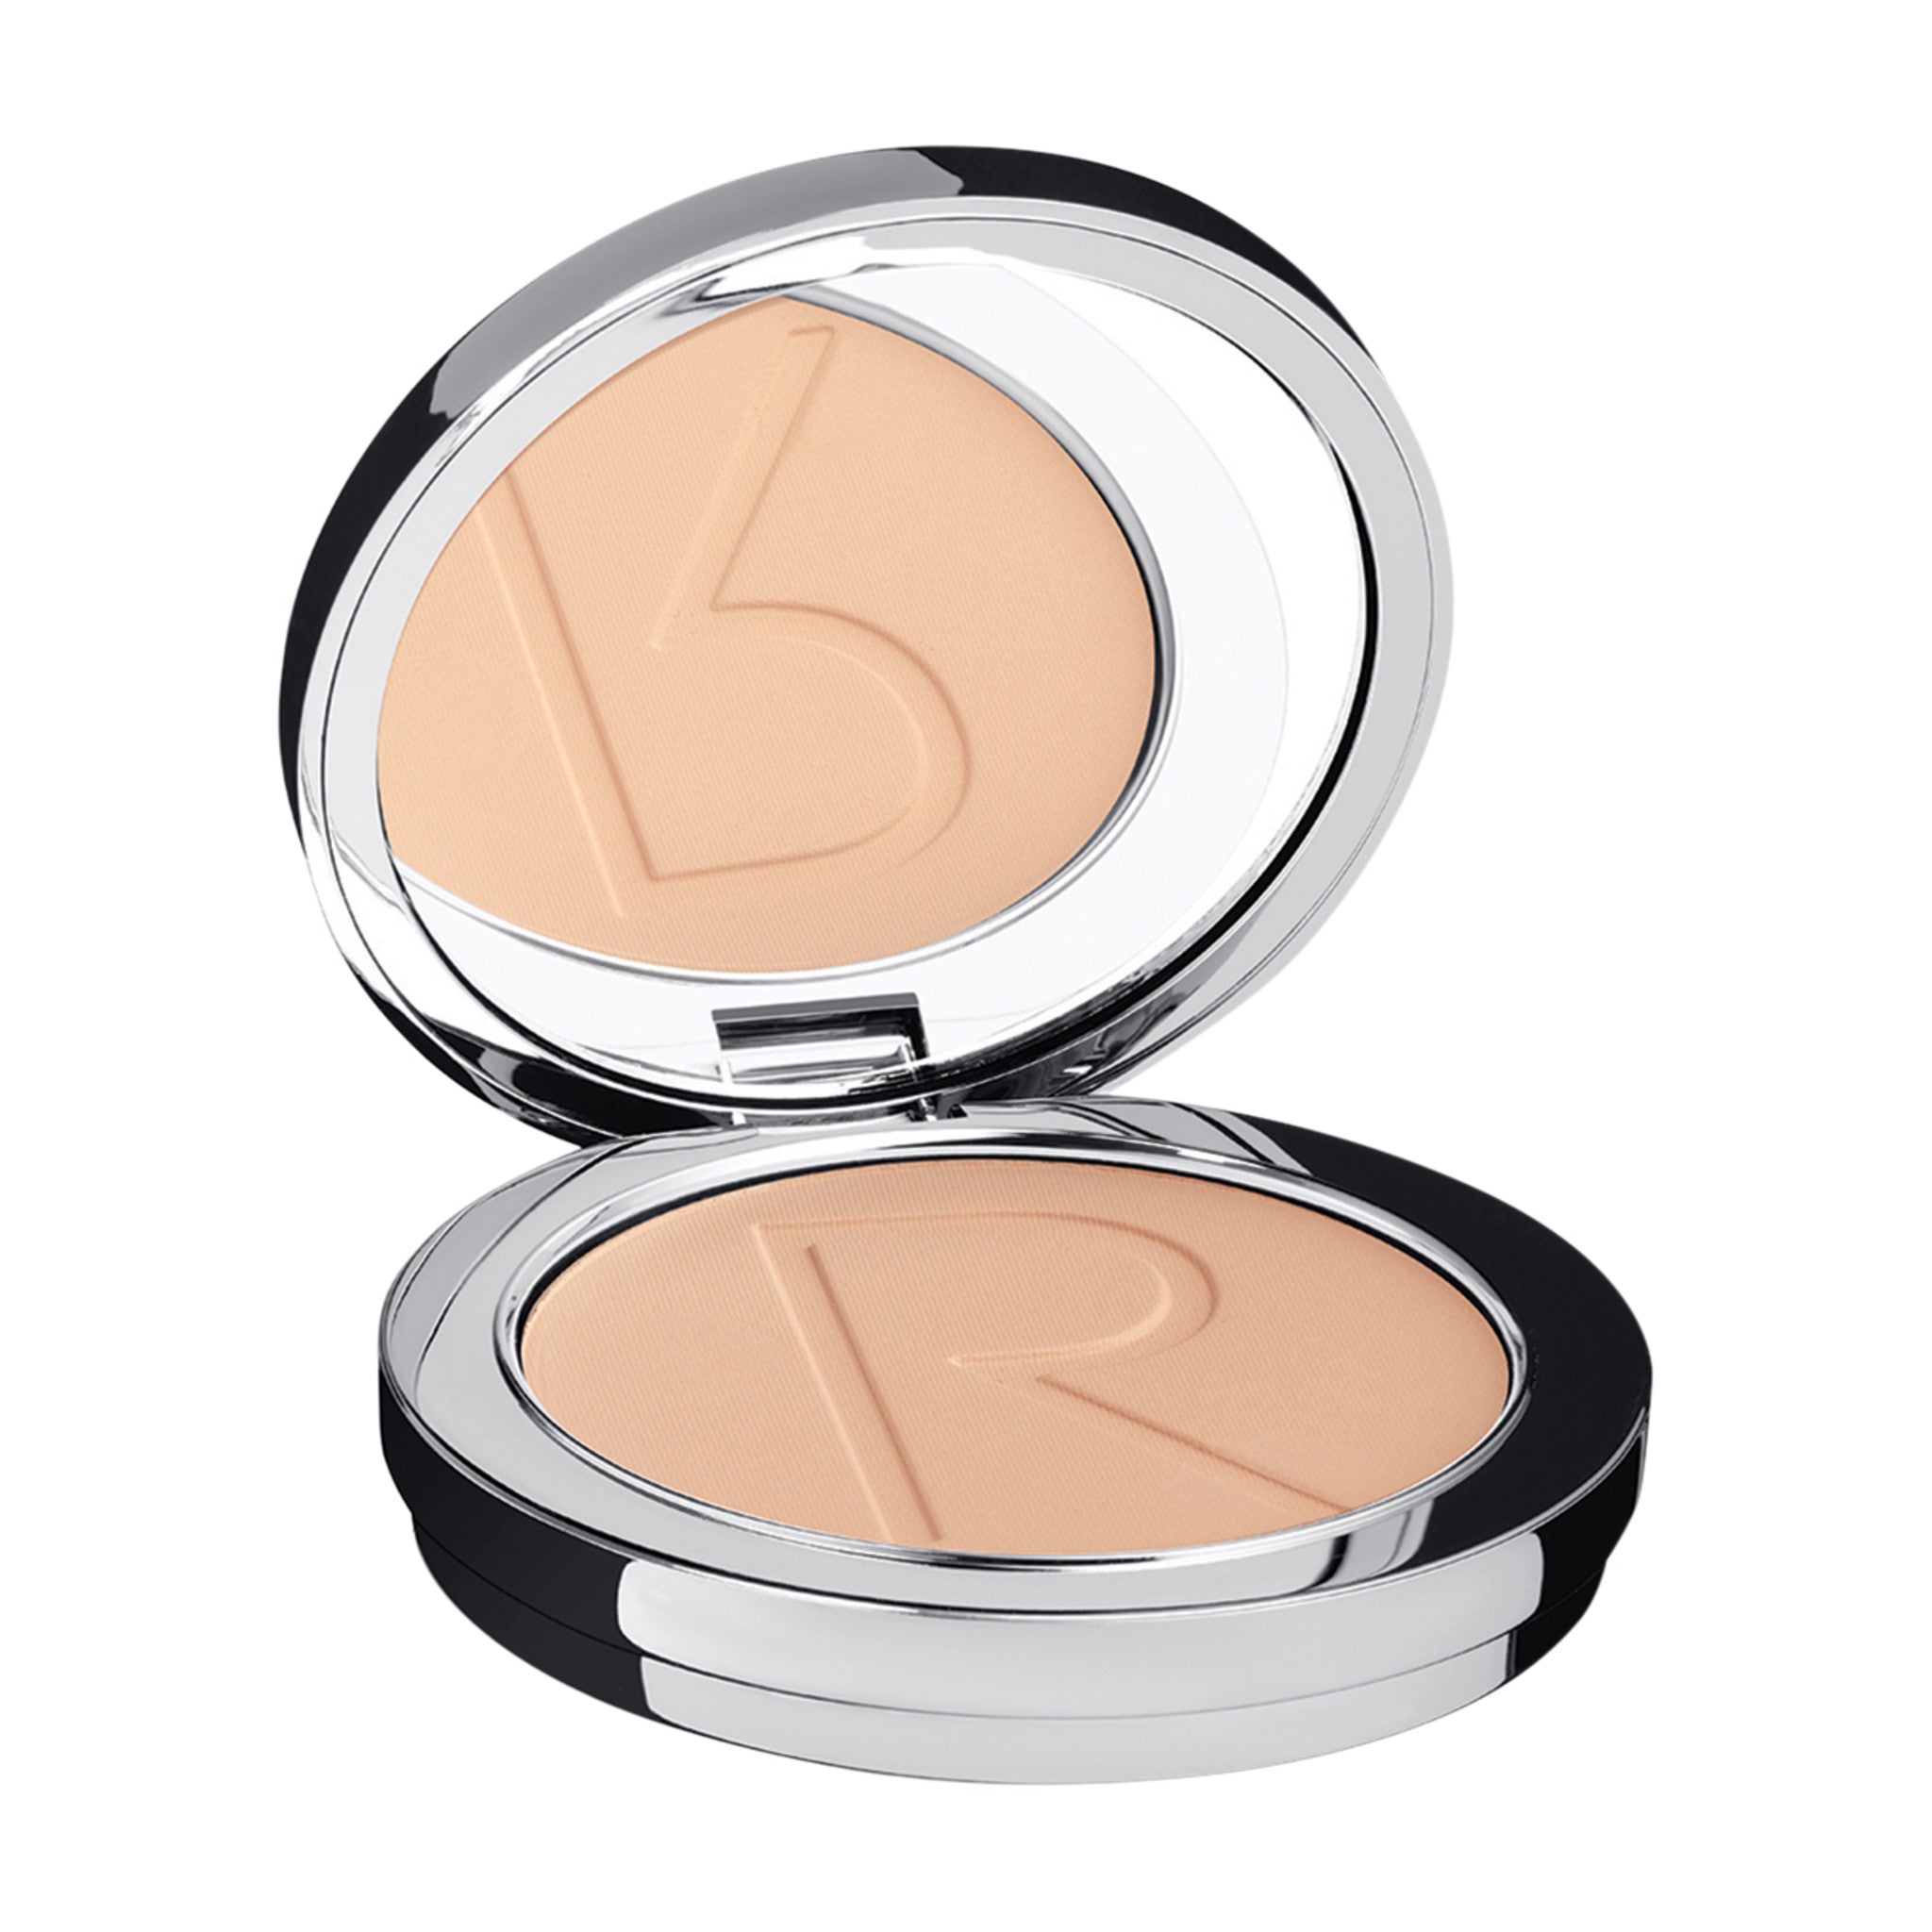 Rodial Peach Powder main image. This product is in the color pink, for all warm peach complexions